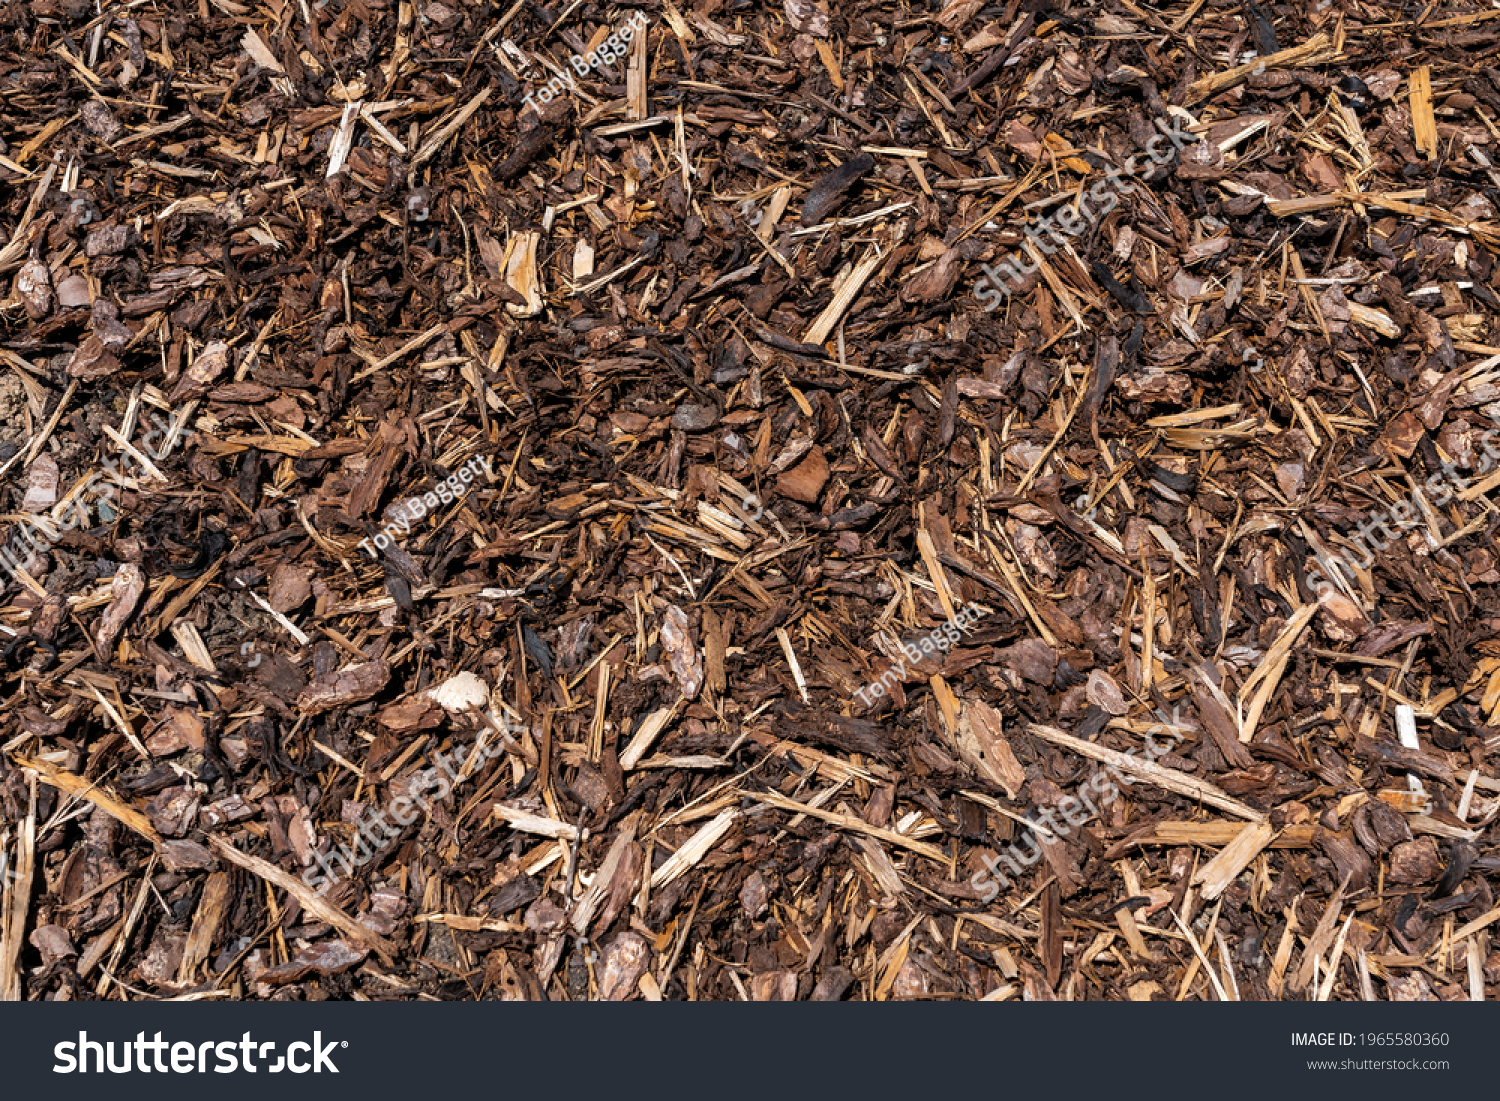 Wood chip bark chippings having been shredded for use as a garden mulch by the lumber timber industry which can be used as an abstract texture background, stock photo image #1965580360